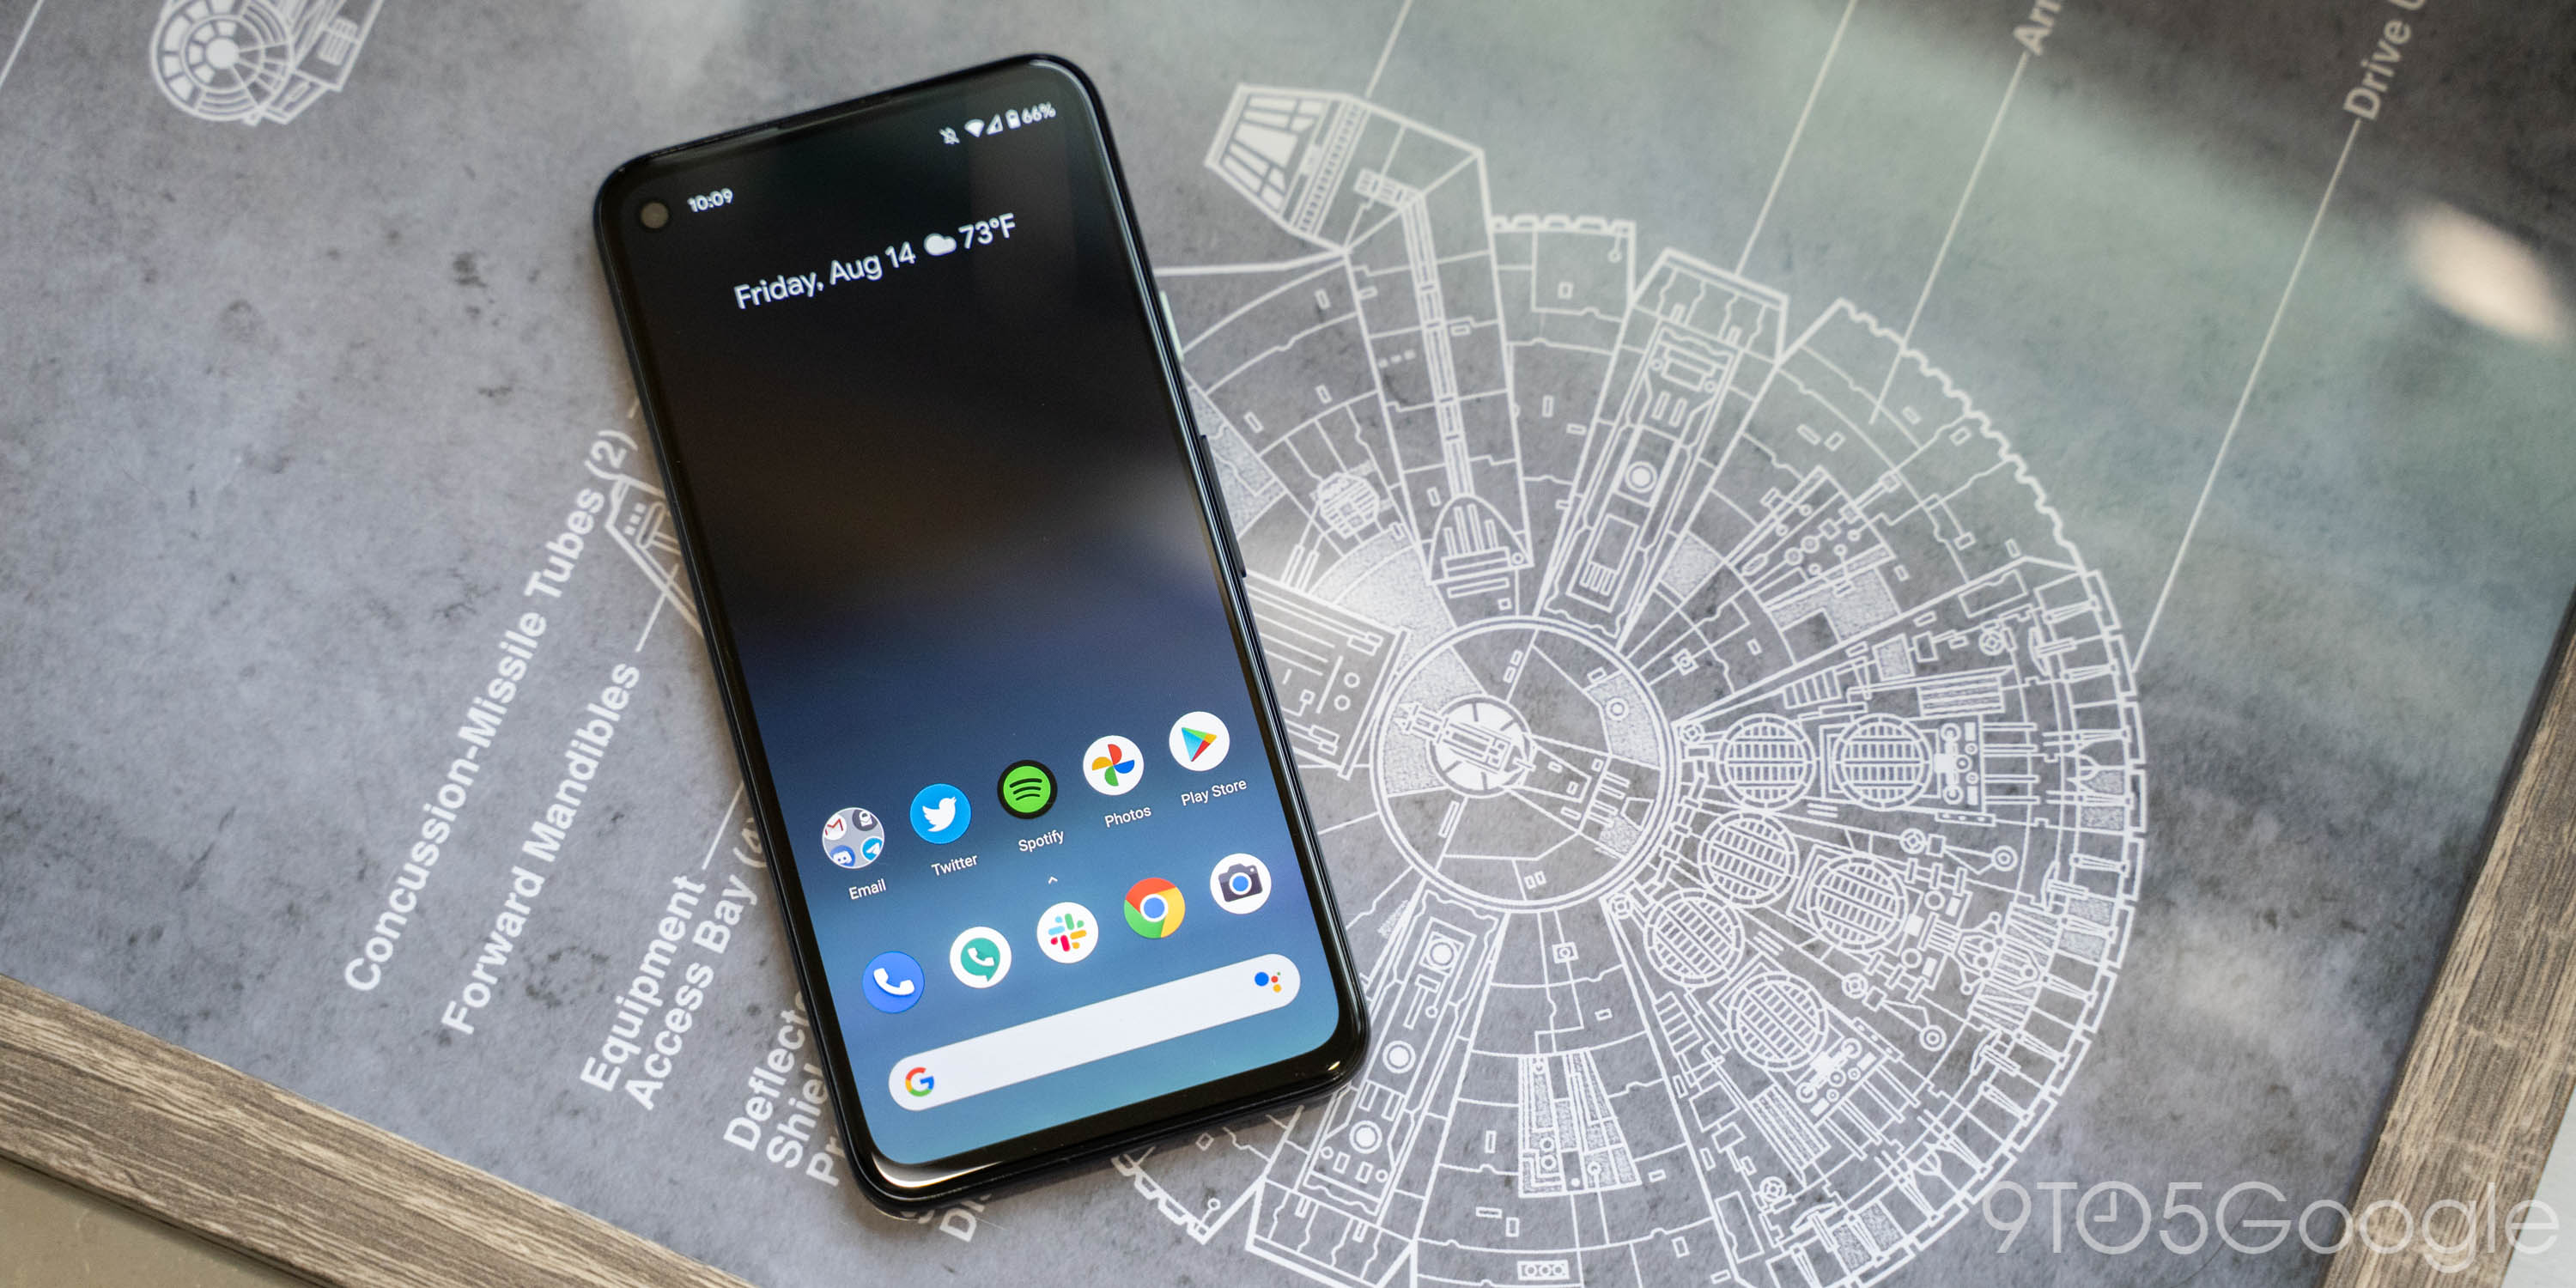 Google publishes Pixel 4a 'sunfish' factory images - 9to5Google